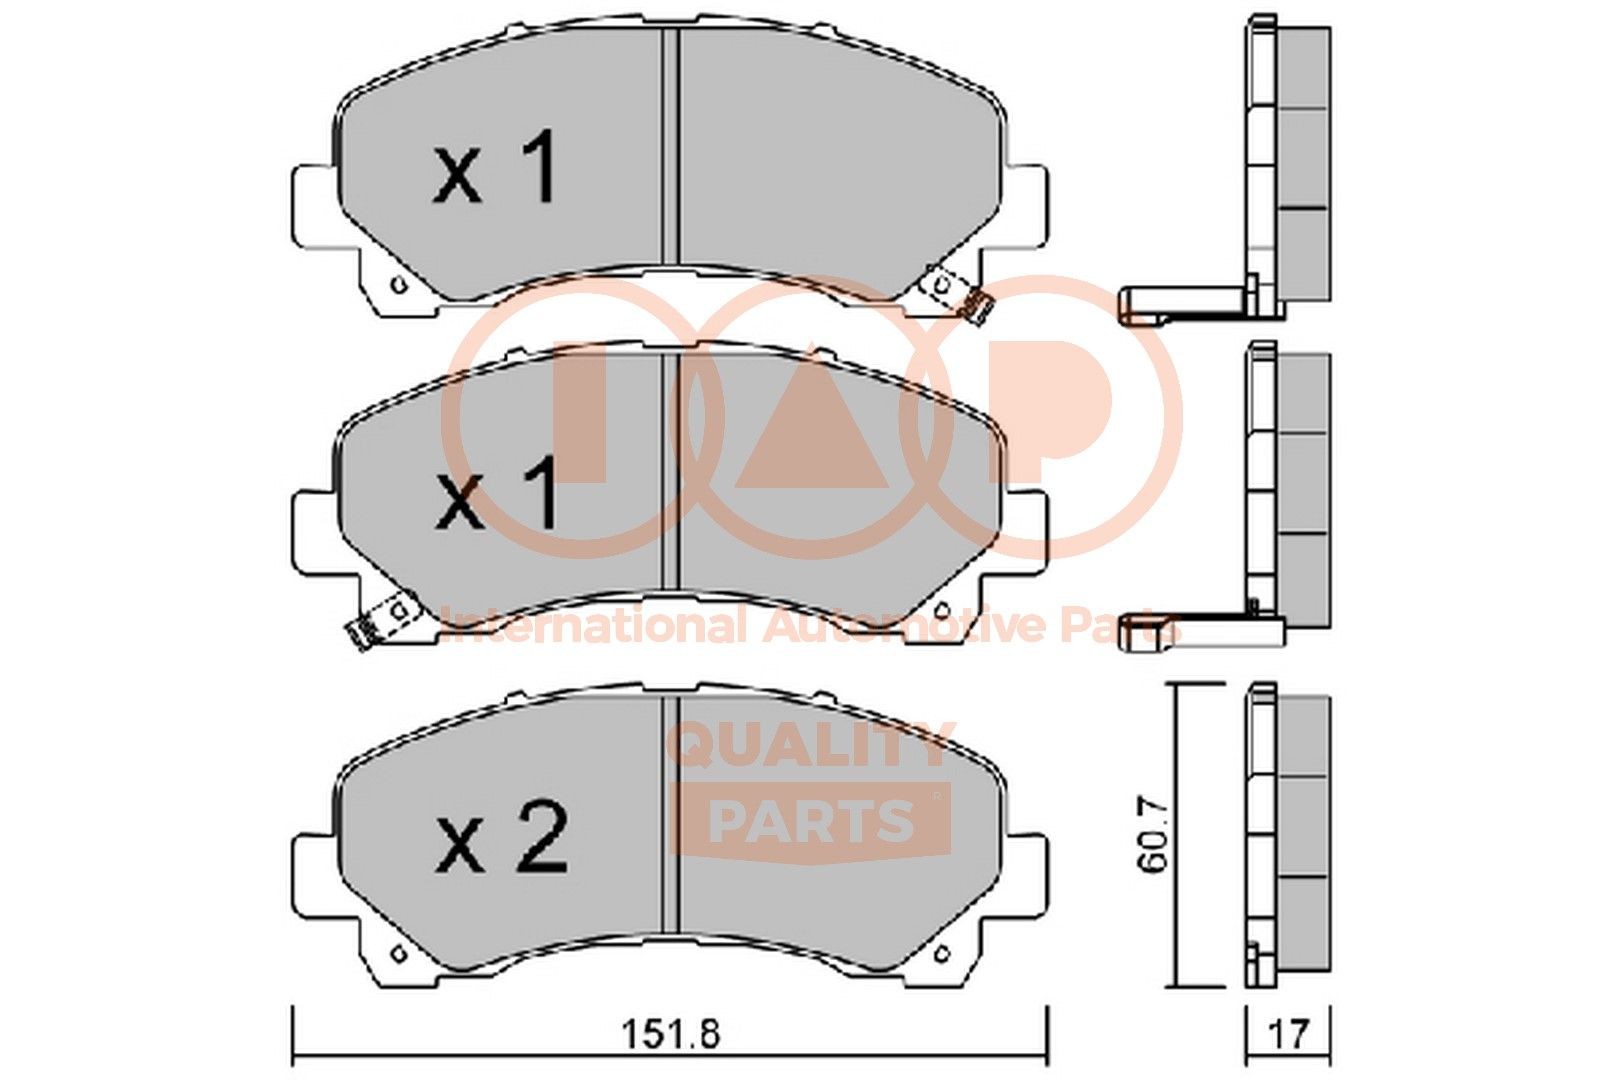 IAP QUALITY PARTS Front Axle Height 1: 60,7mm, Width 1: 151,8mm, Thickness 1: 17mm Brake pads 704-09023P buy